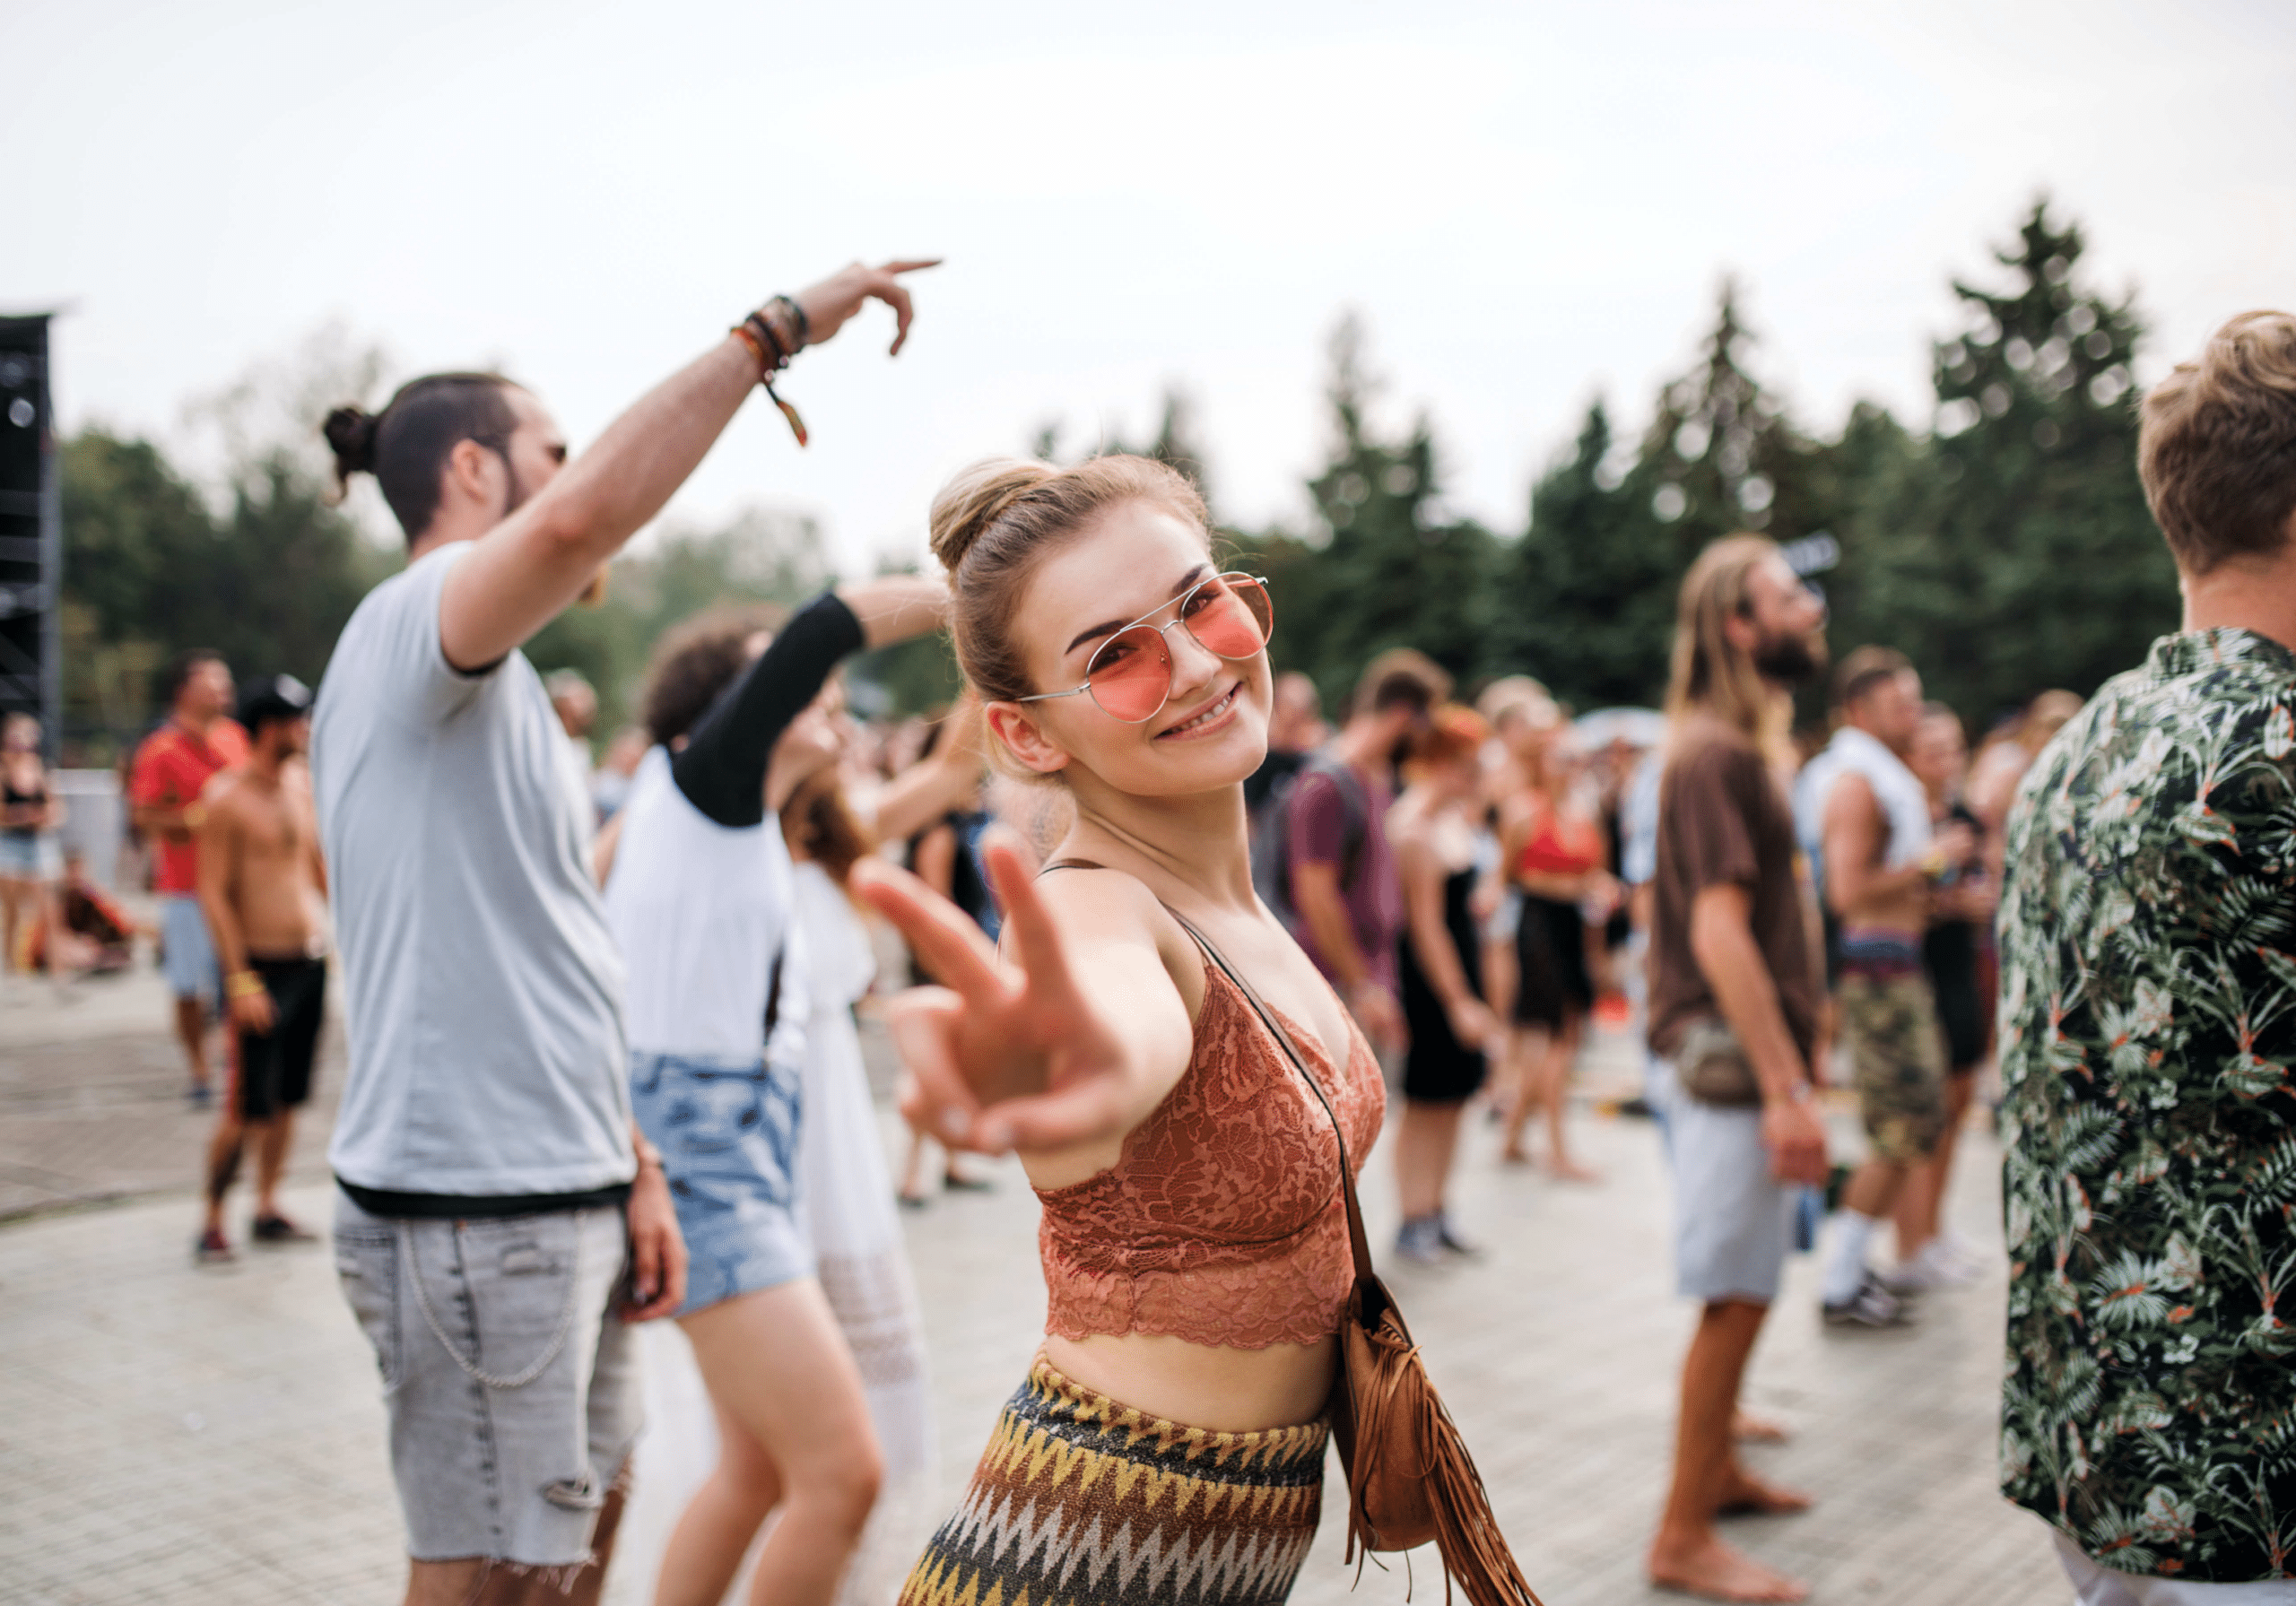 a college girl wearing sunglasses and making a peace sign as she jams out at a festival with other college students